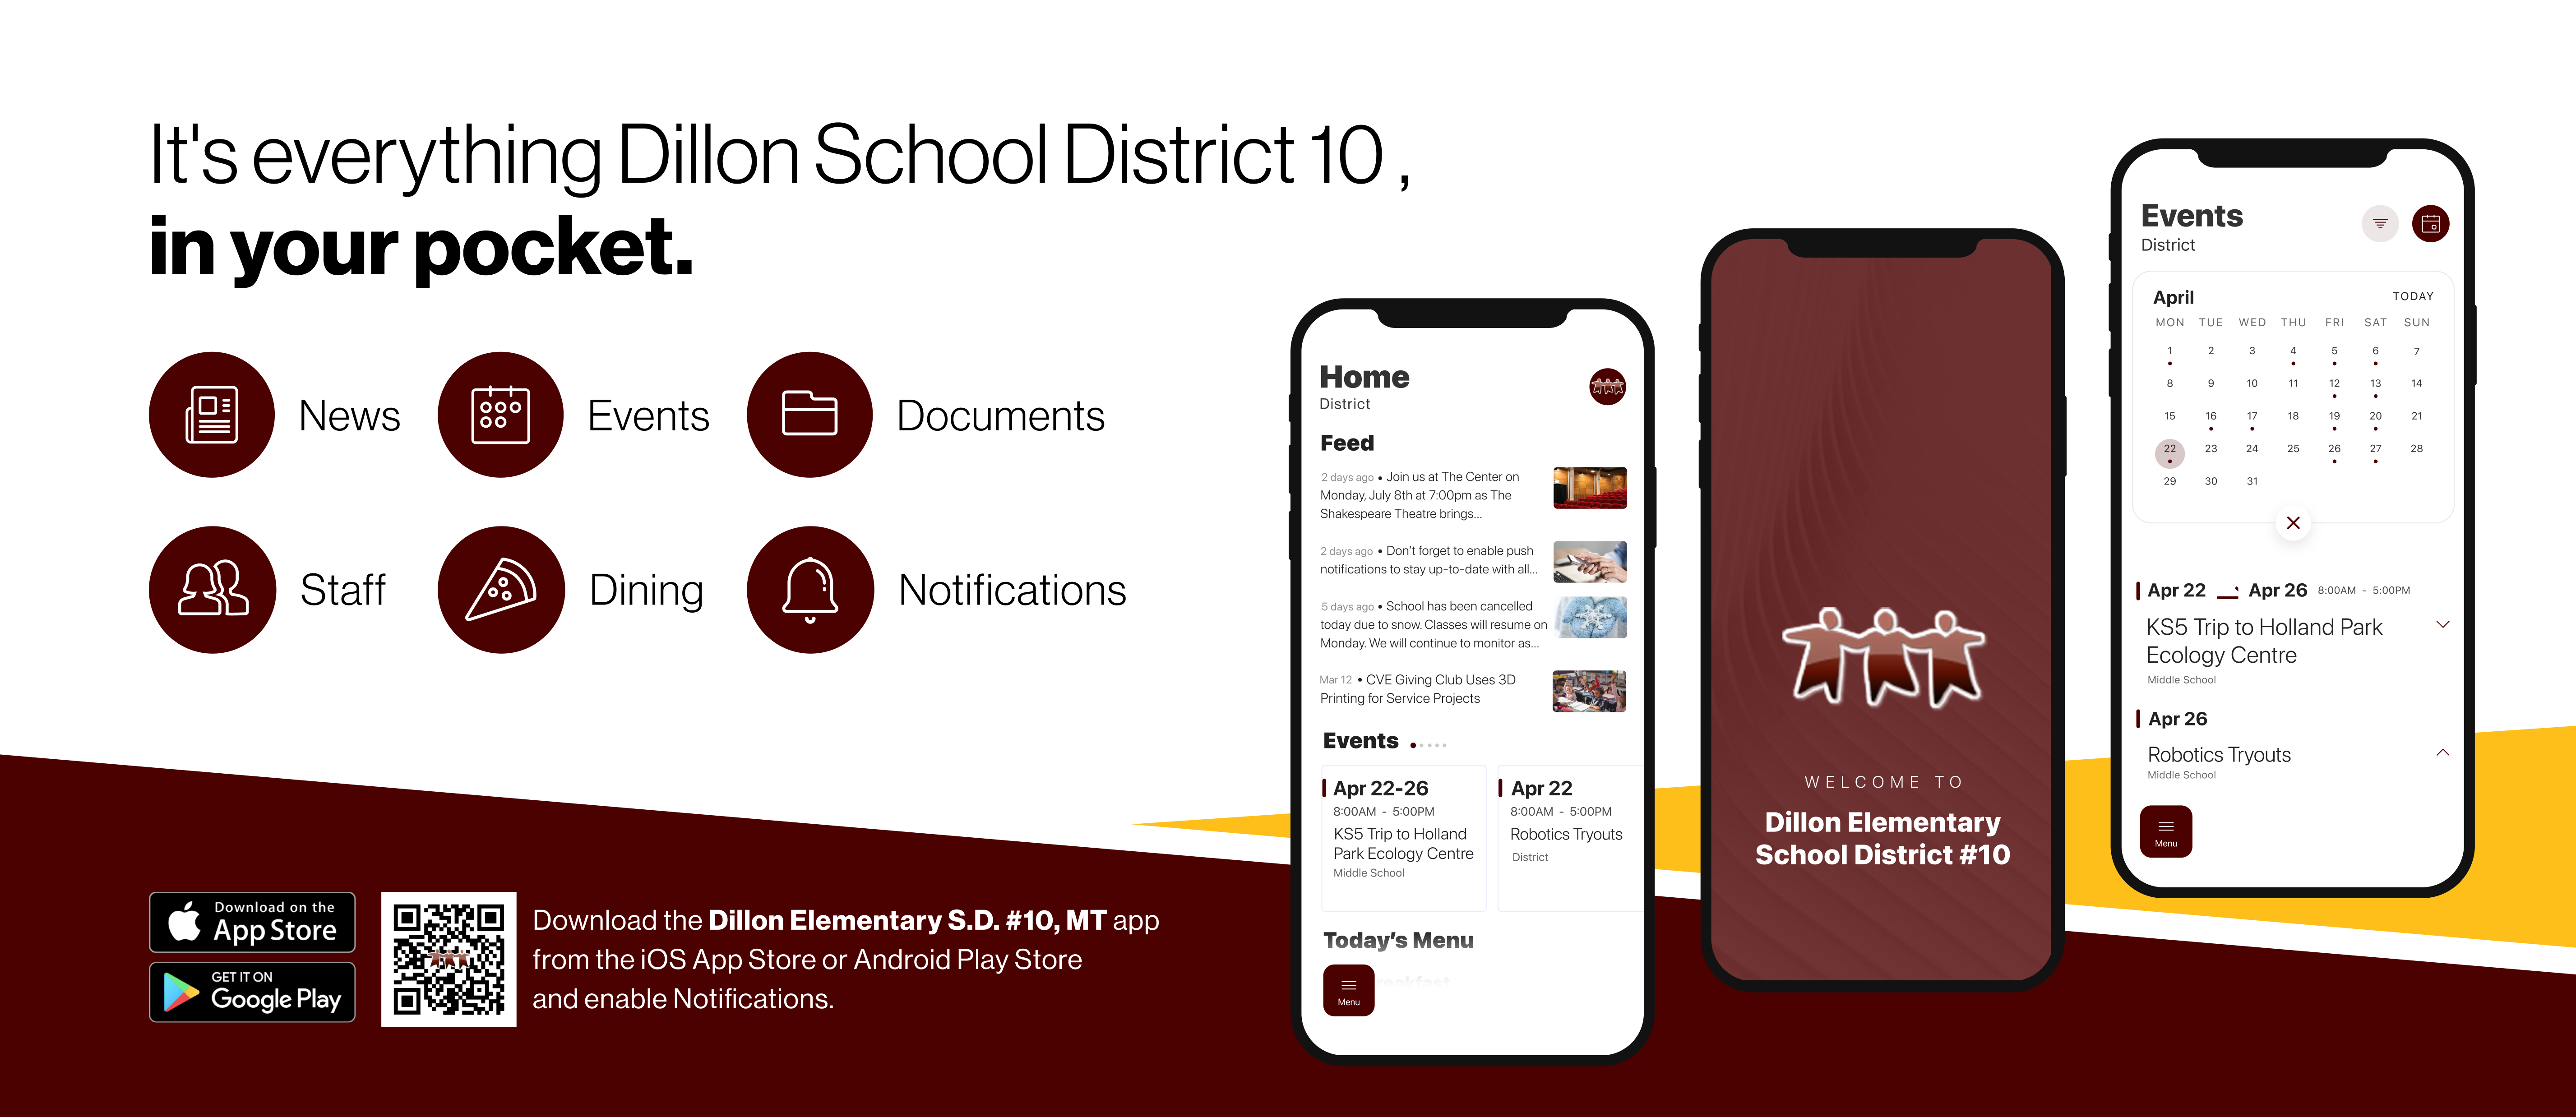 It's everything Dillon School District 10 in your pocket.